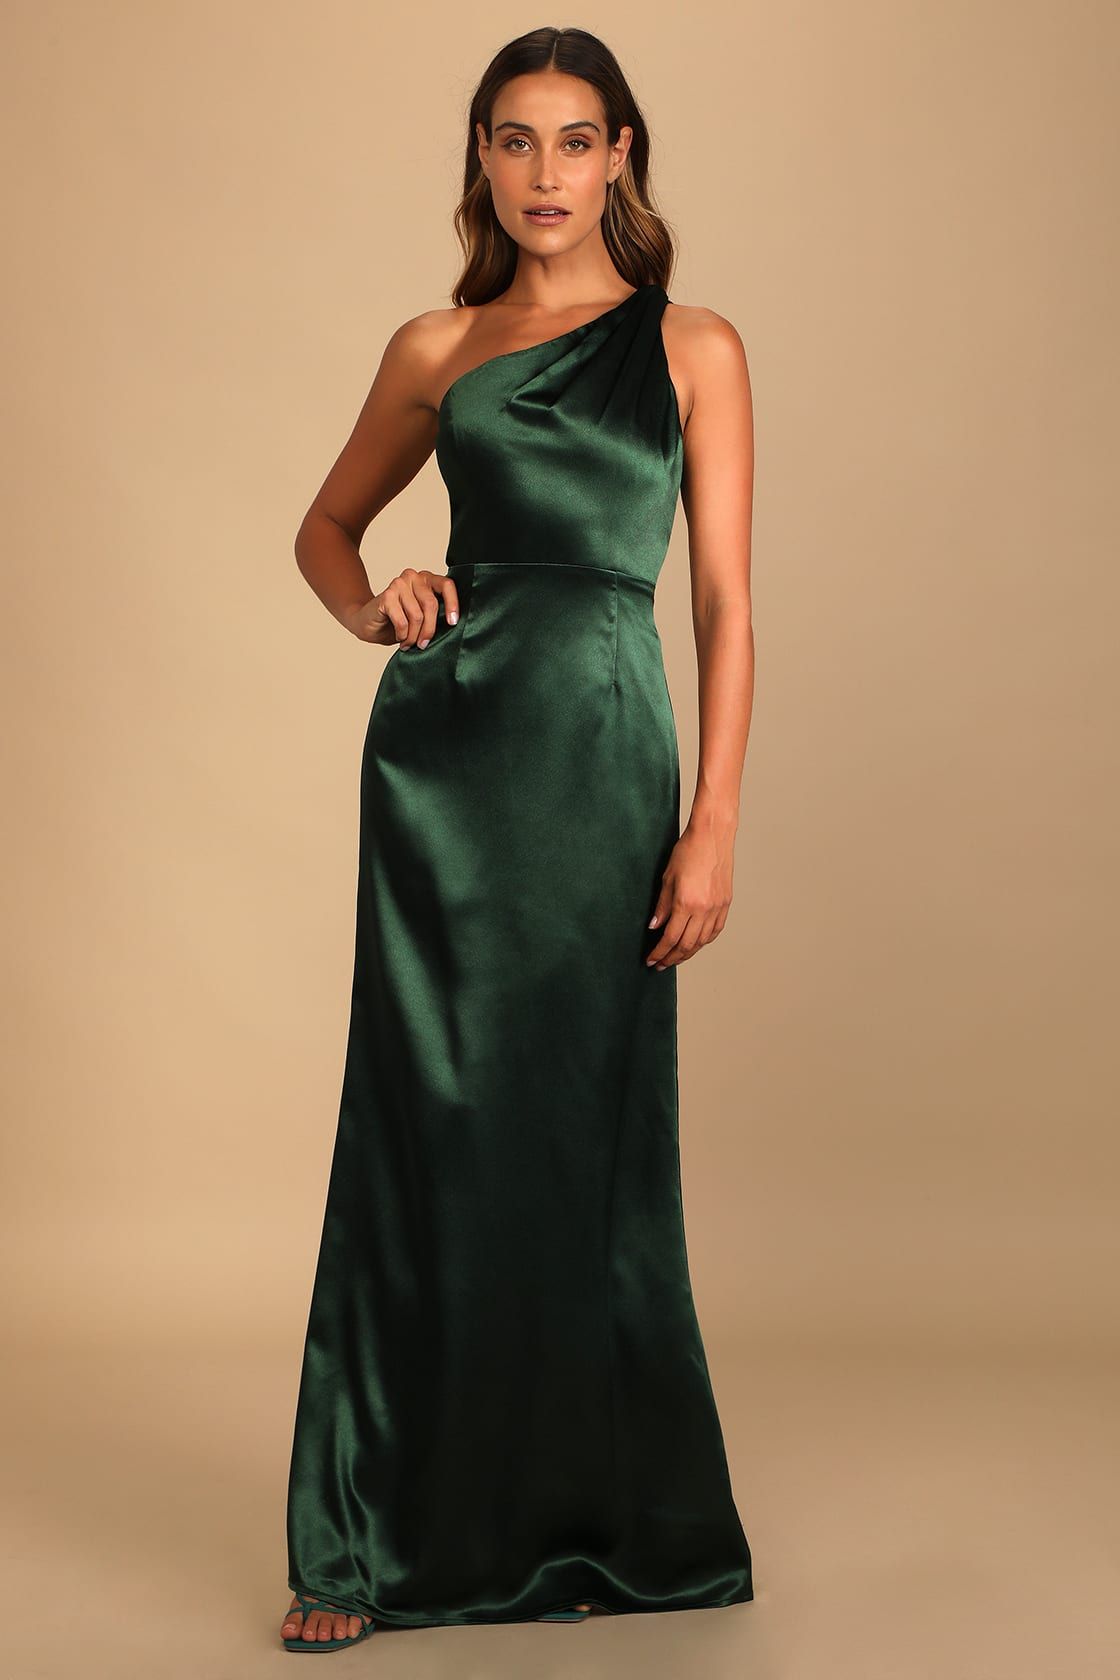 On the Guest List Emerald Green Satin One-Shoulder Maxi Dress | Lulus (US)